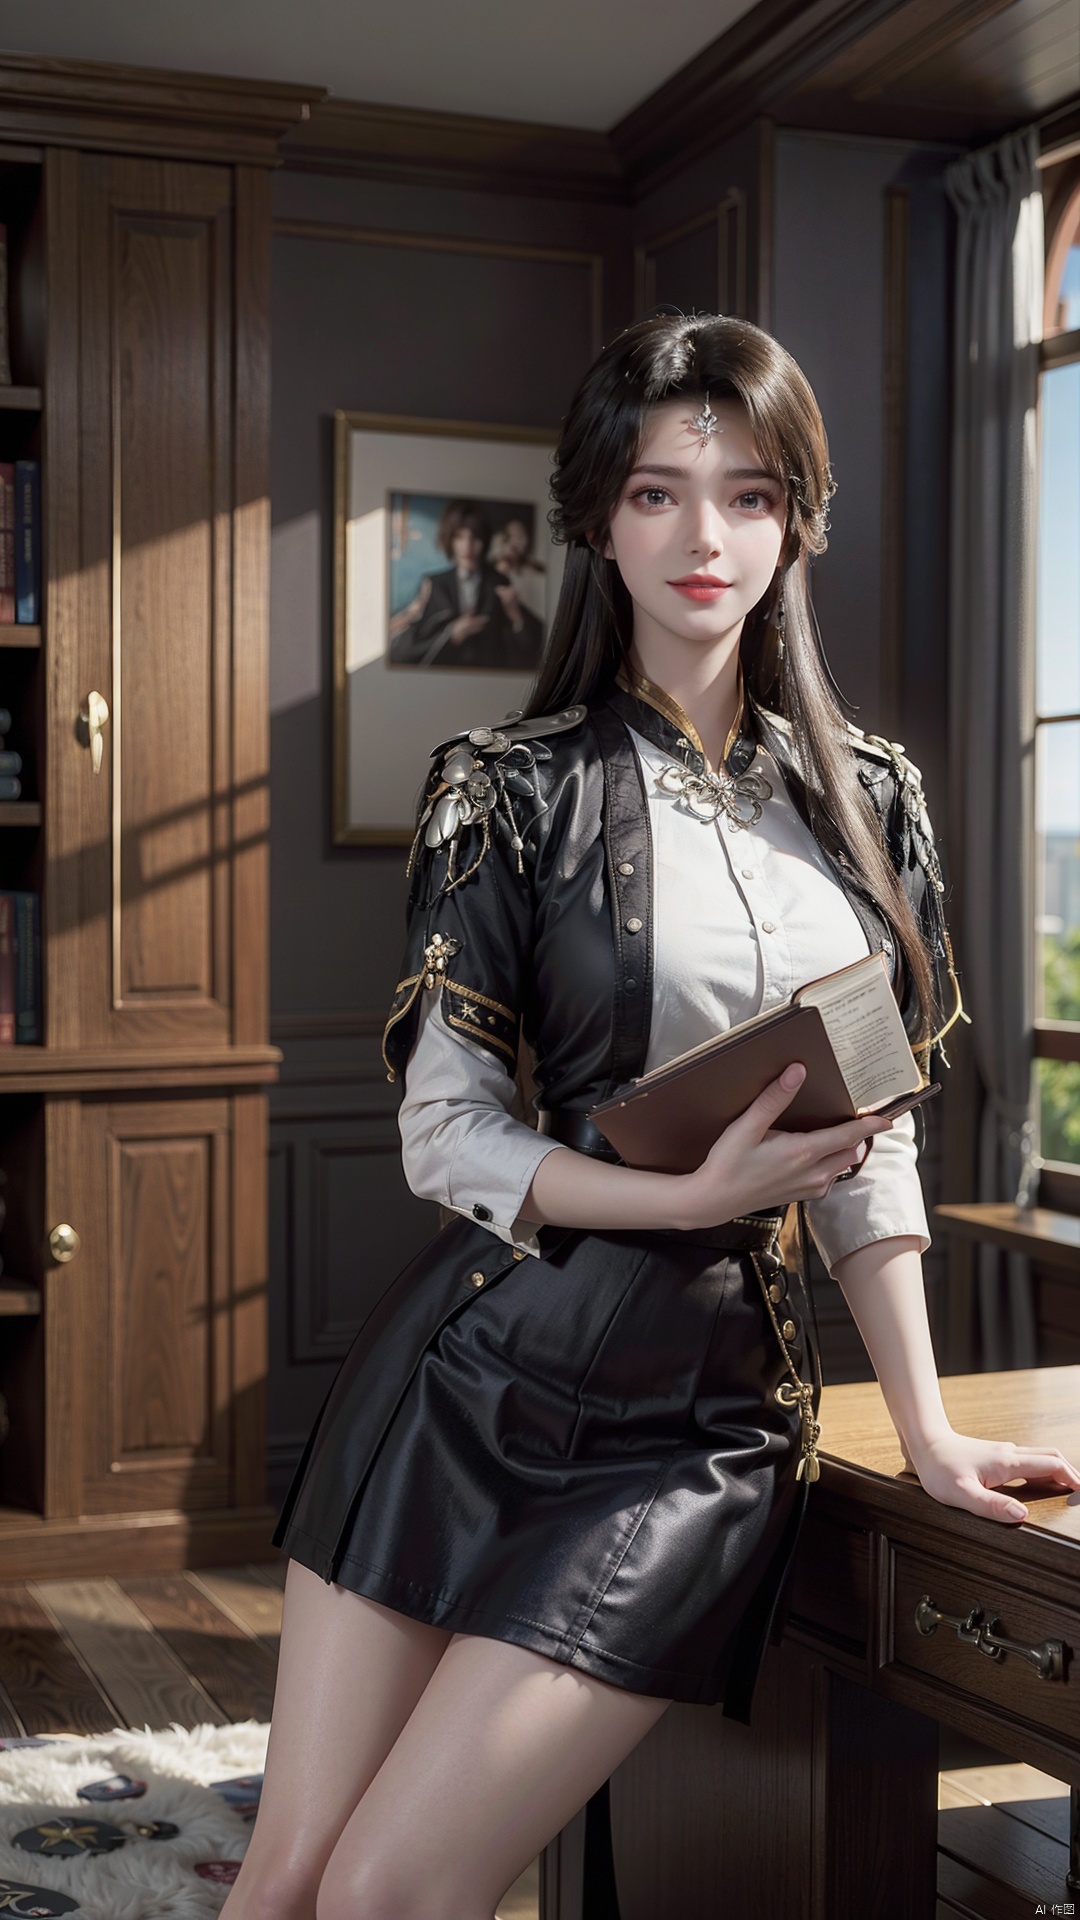  (look book:1.6),(In the study:1.5),a girl, (behind the girl is a bookcase:1.2),(the girl is holding a book in her hand:1.5),((Best quality)) ,Commercial photograph,(center of screen) , (good composition), (in frame), centered, 8k, 4k, detailed, attractive, beautiful, impressive, photorealistic, realistic, cinematic composition, volumetric lighting, high-resolution, vivid, detailed, stunning, professional, lifelike, crisp, flawless, DSLR, detailed, sharp, best quality, high quality, highres, absurdres,smiling,Half body, Uniform 8k quality, Super Detail, 1 girl,wide_shot,full_shot,d,aoa,on back,on_side,prone_bone,dark academia,wzgrx, room2